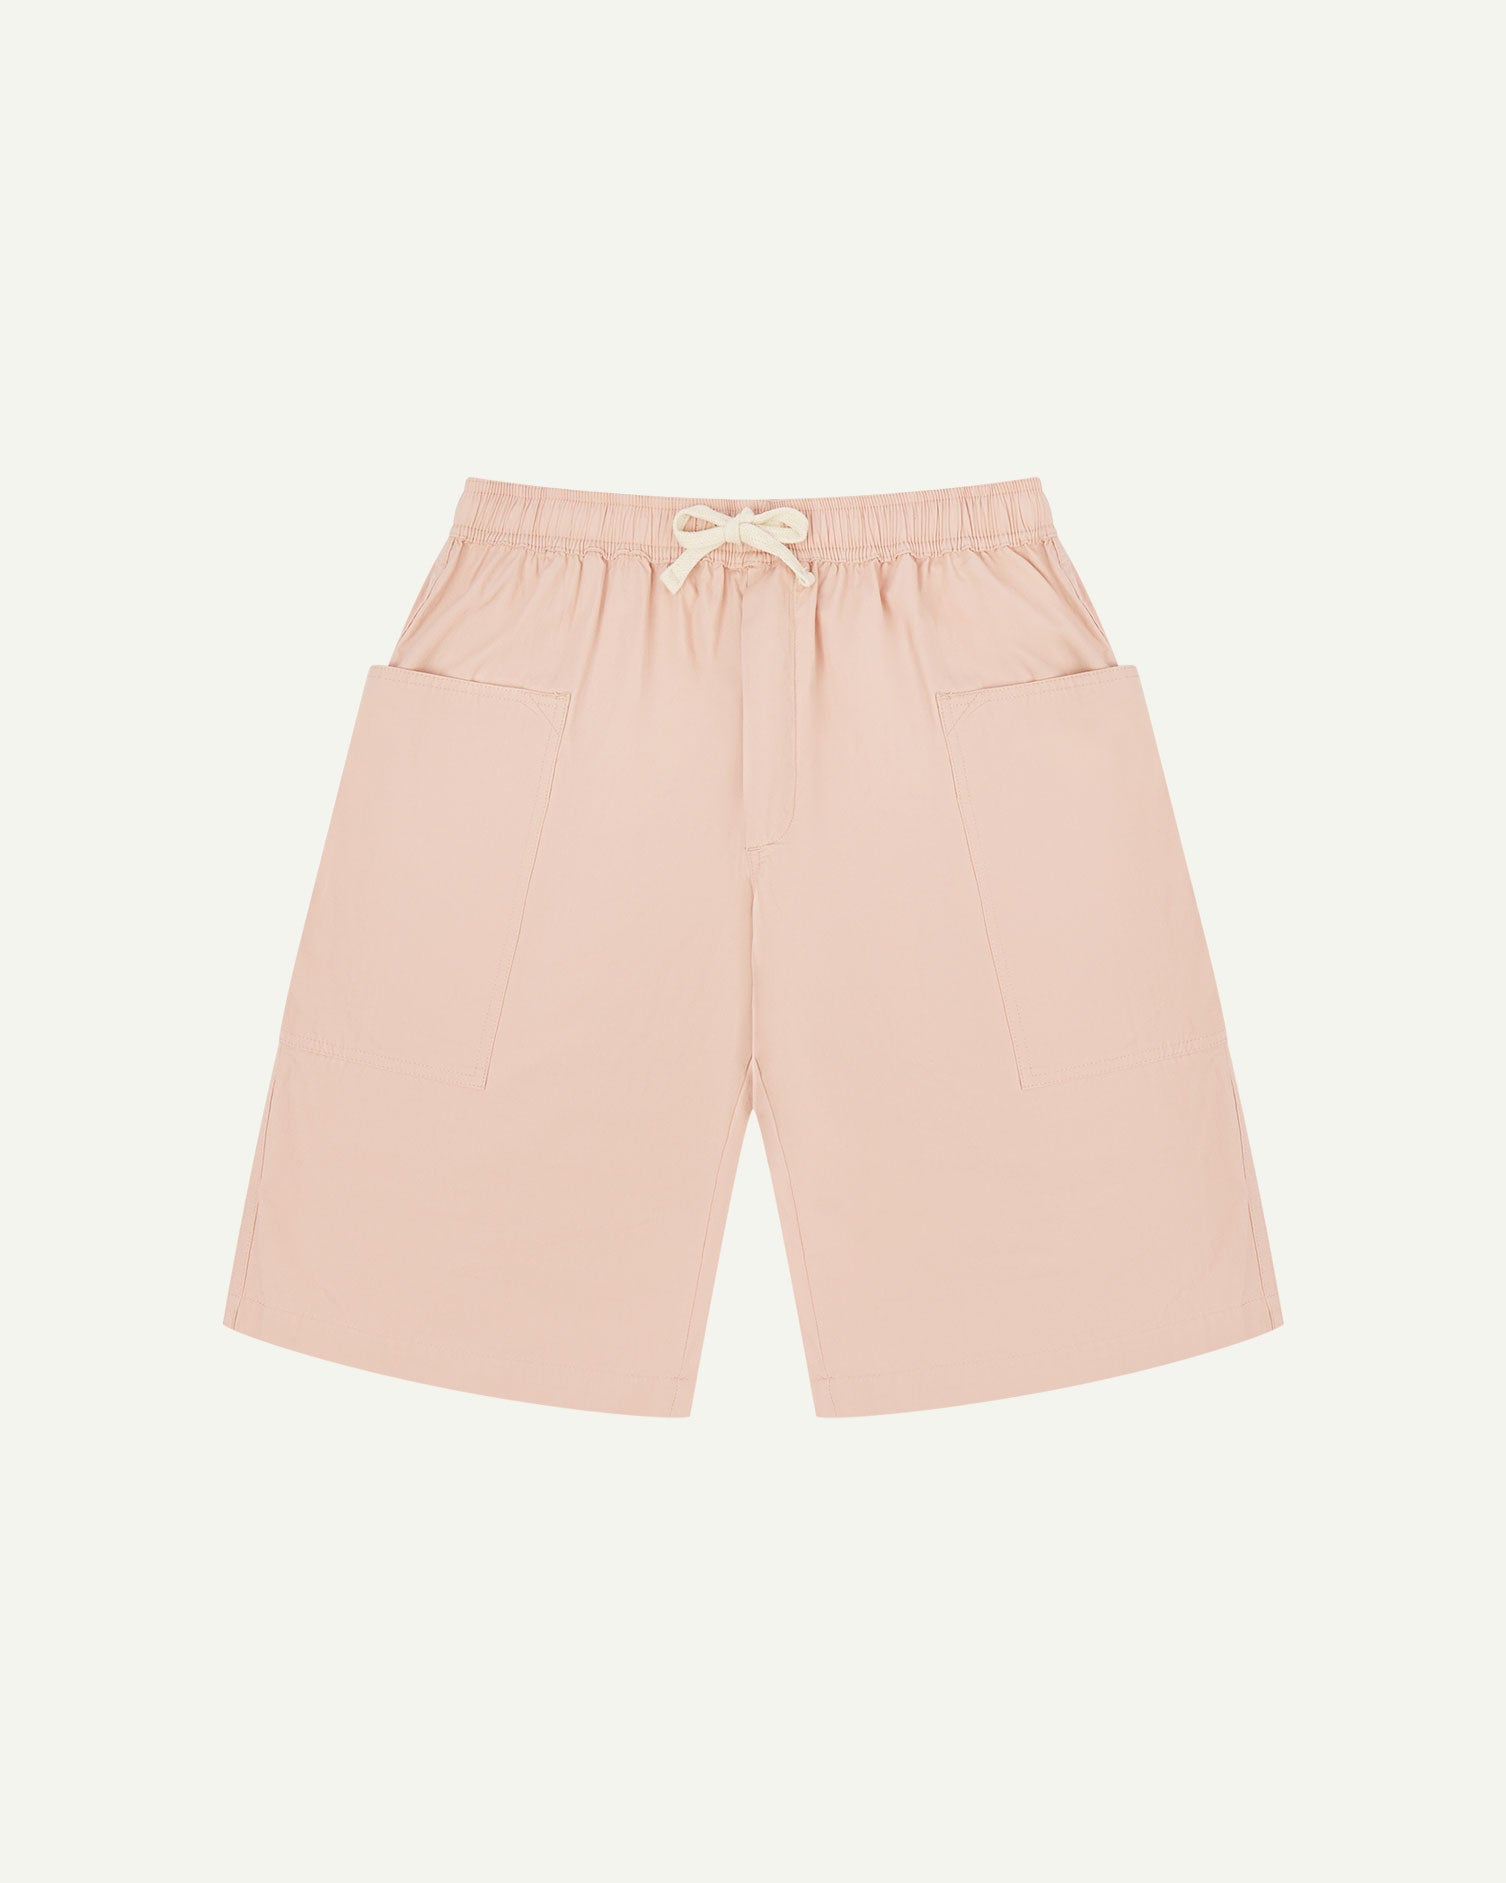 Front flat view of dusty pink organic cotton #5015 lightweight cotton shorts by Uskees. Clear view of drawstring and deep front pockets.